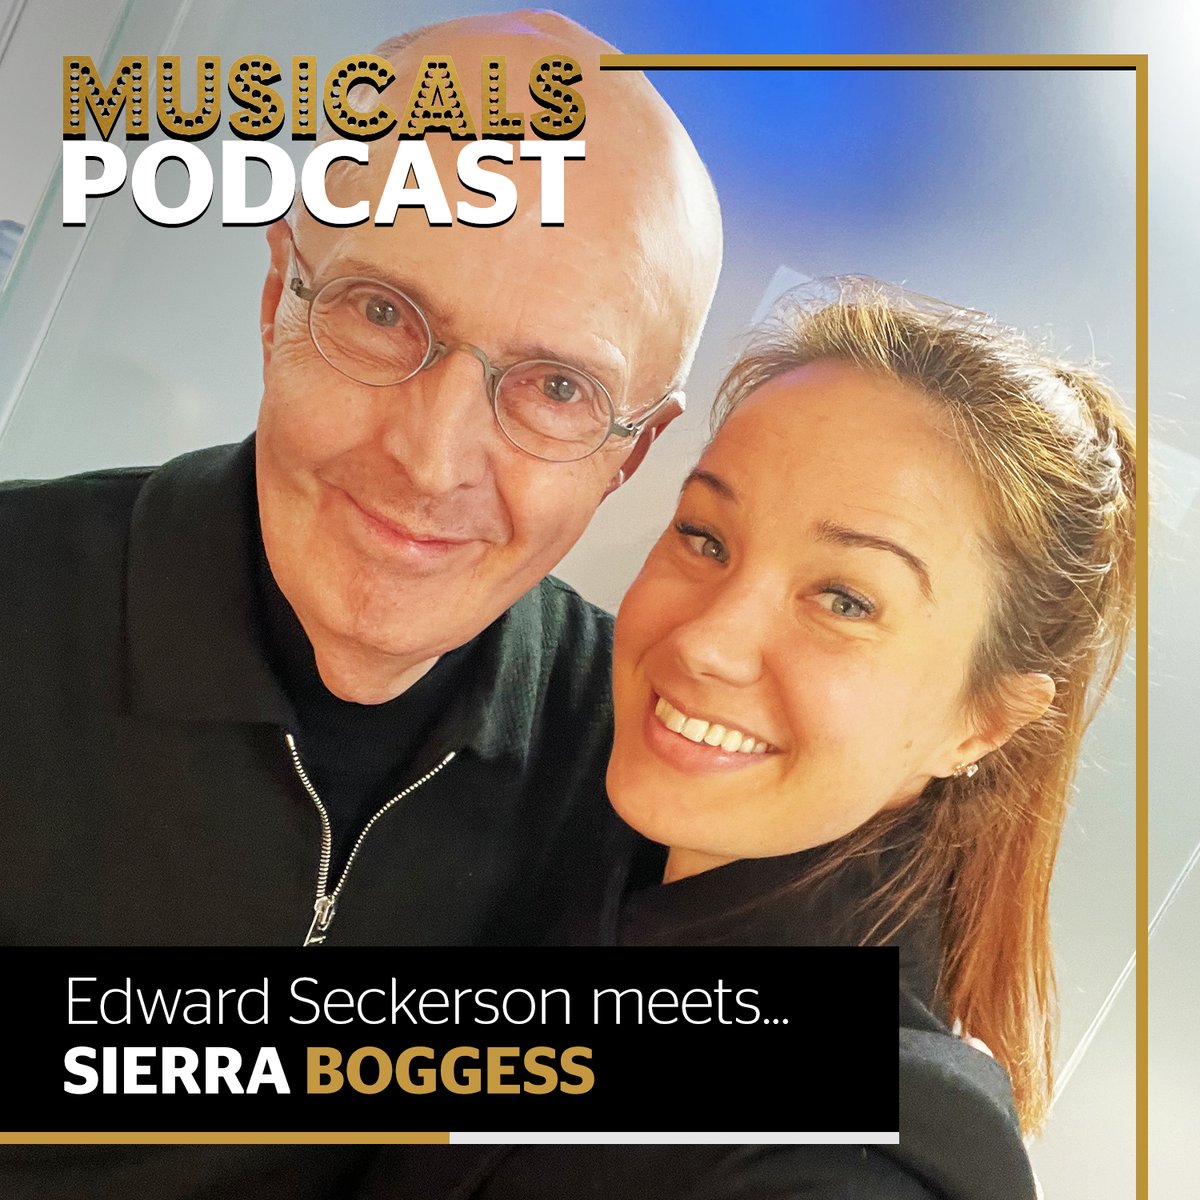 The new @MusicalsMag #podcast episode is live; @seckerson talks to the Broadway and West End star @sierraboggess and includes a WORLD-EXCLUSIVE preview from the forthcoming recording of Oklahoma! with John Wilson and @SinfoniaOfLondn on @ChandosRecords 👉podcasts.apple.com/gb/podcast/mus…